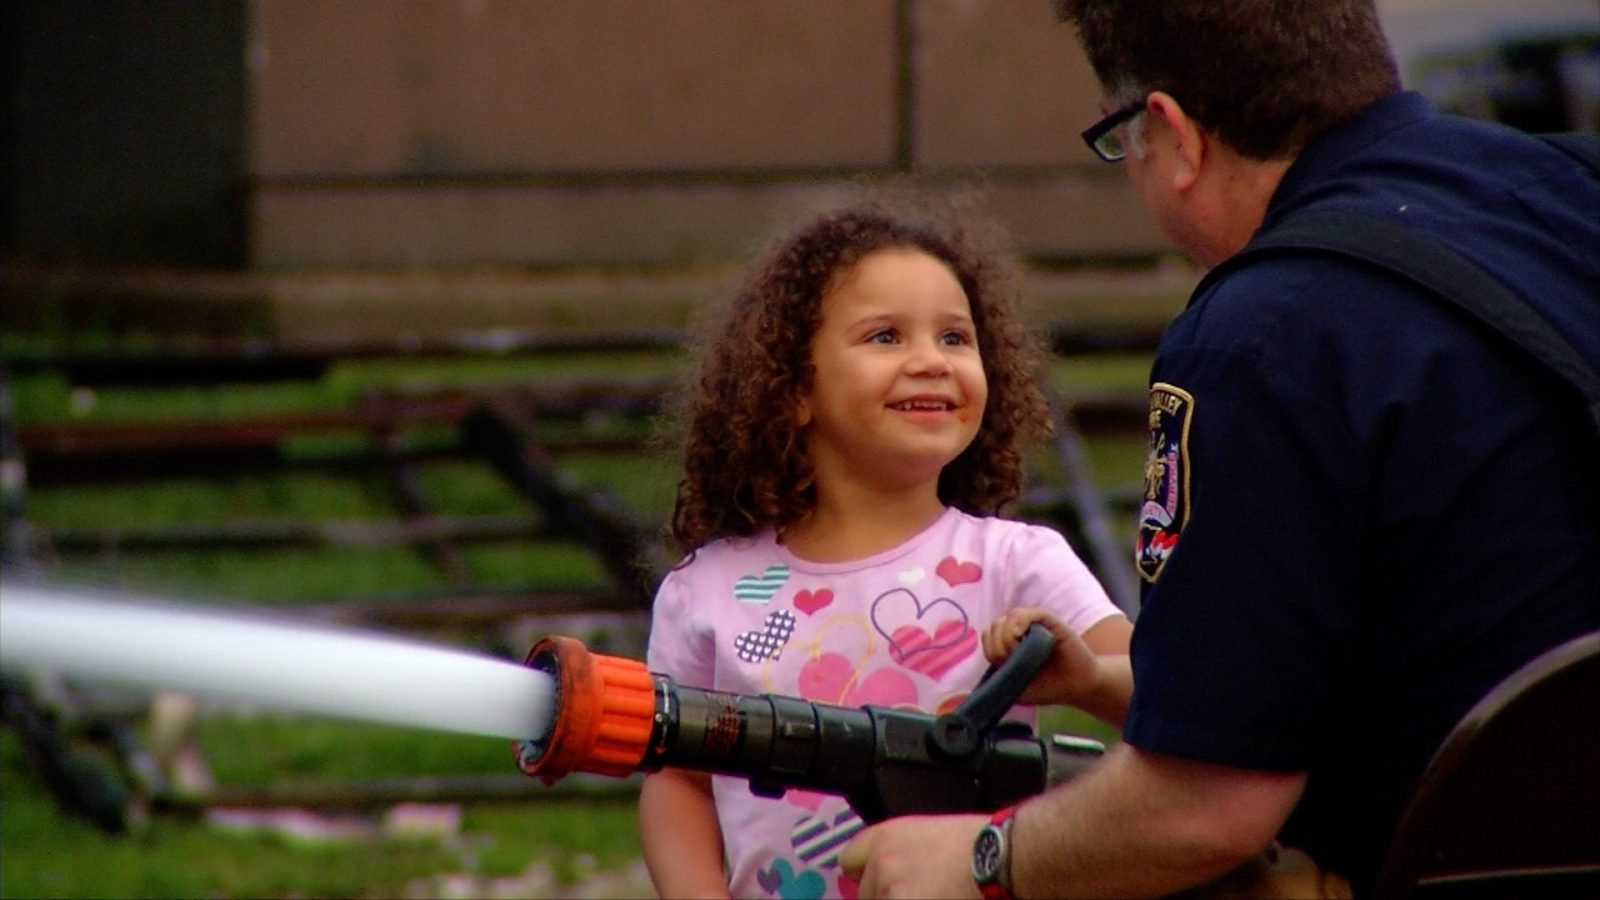 A girl tries out a fire hose with help from a Golden Valley firefighter at the Public Safety Open House